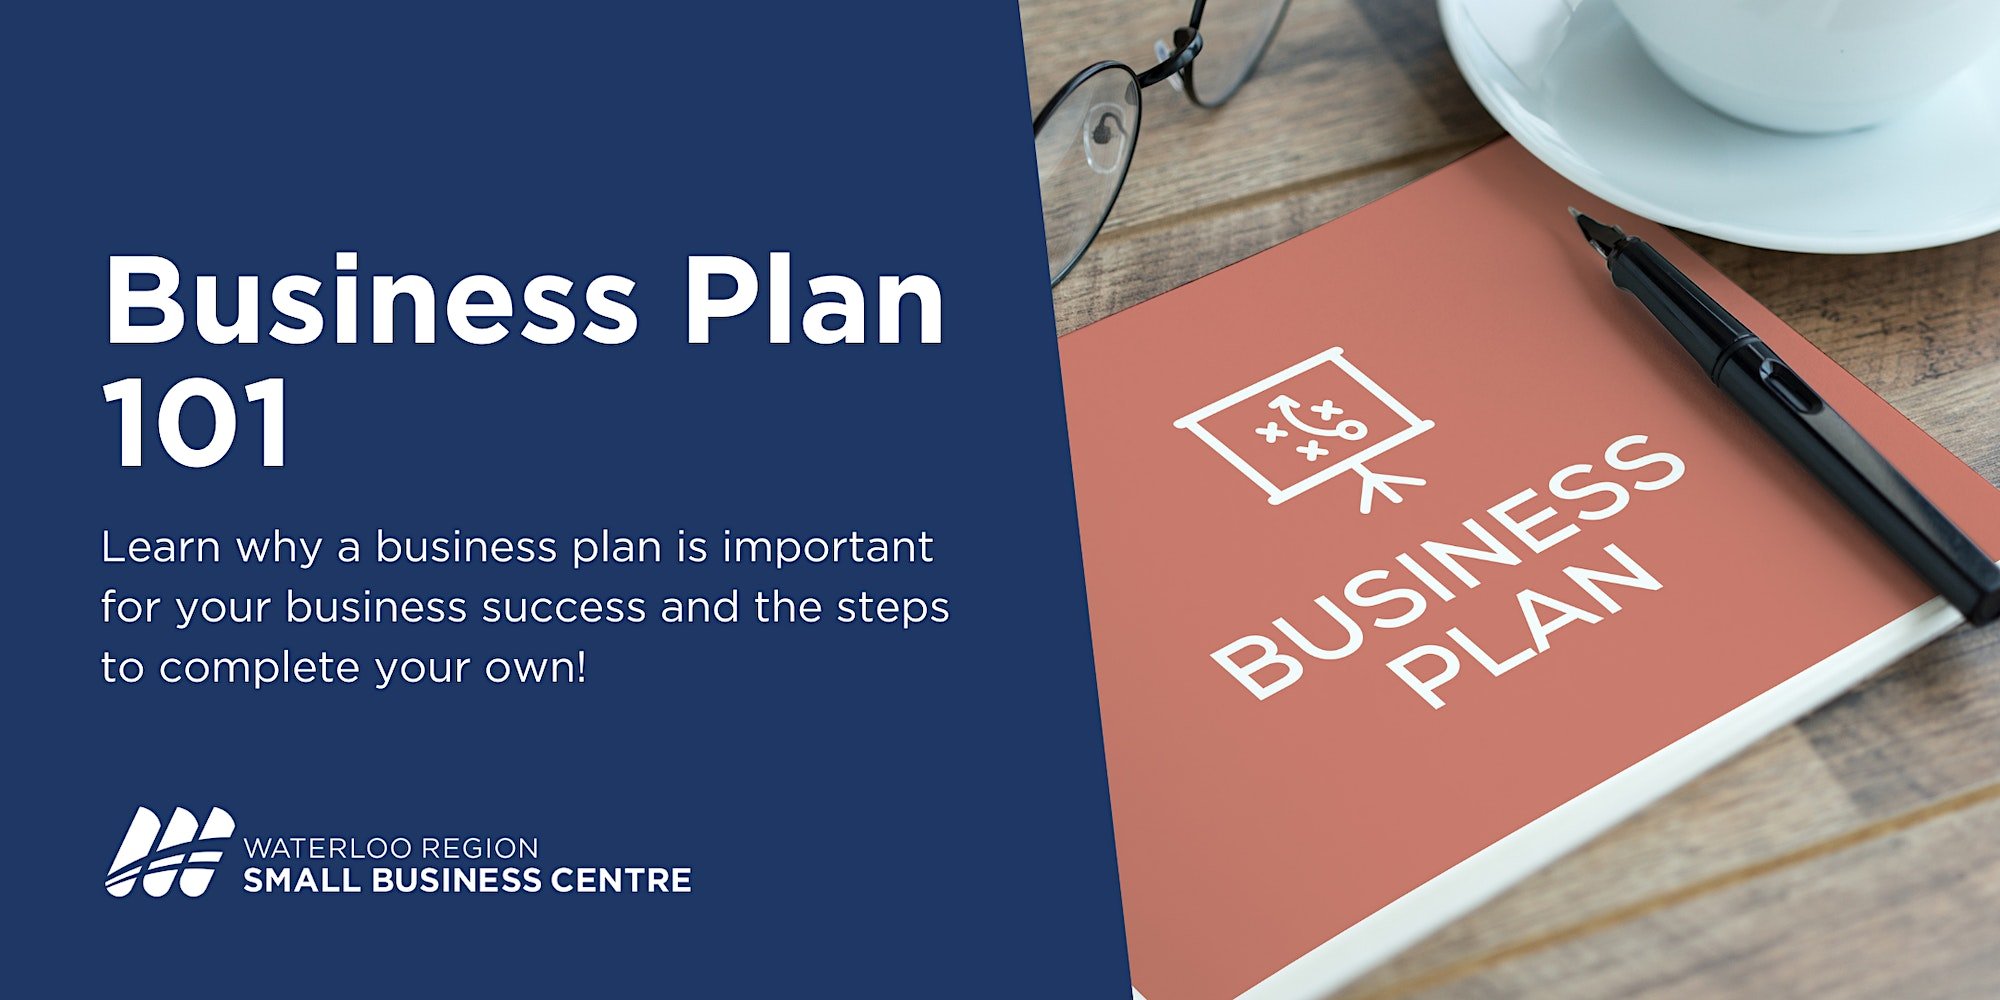 Business Plan 101 webinar series for small businesses, hosted by Waterloo Region Small Business Centre